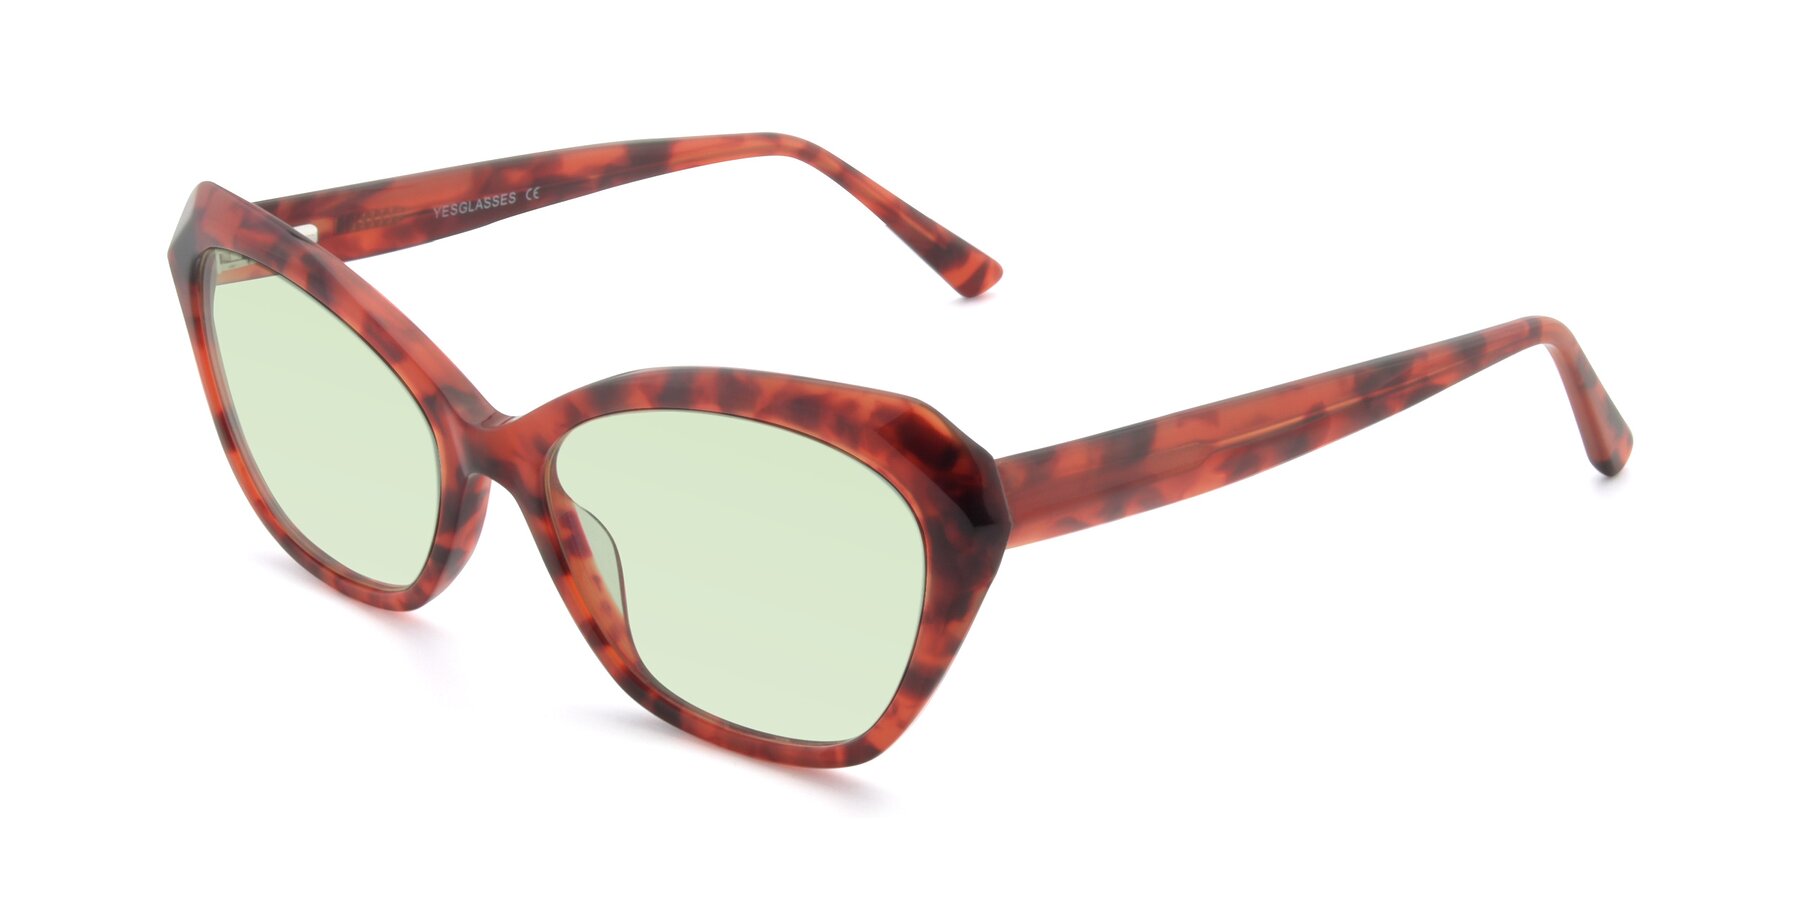 Angle of 17351 in Floral Red with Light Green Tinted Lenses